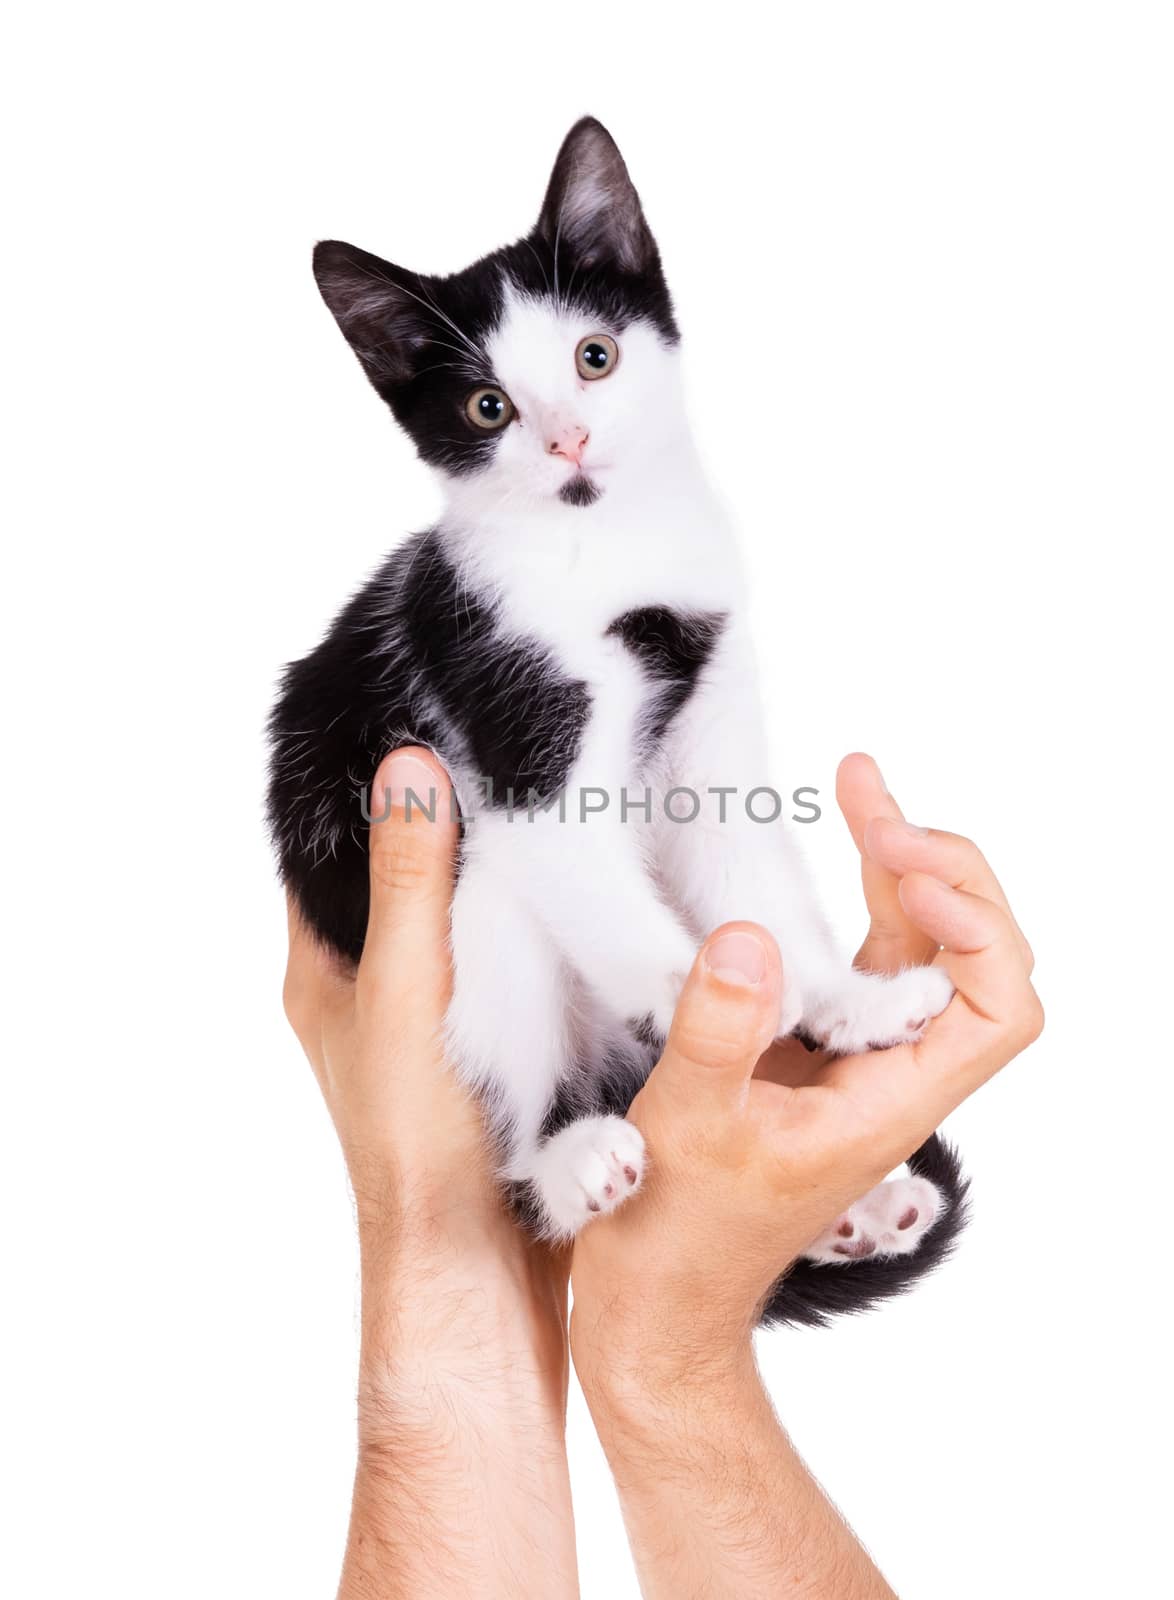 Black and white kitten in the hands of an adult man, isolated